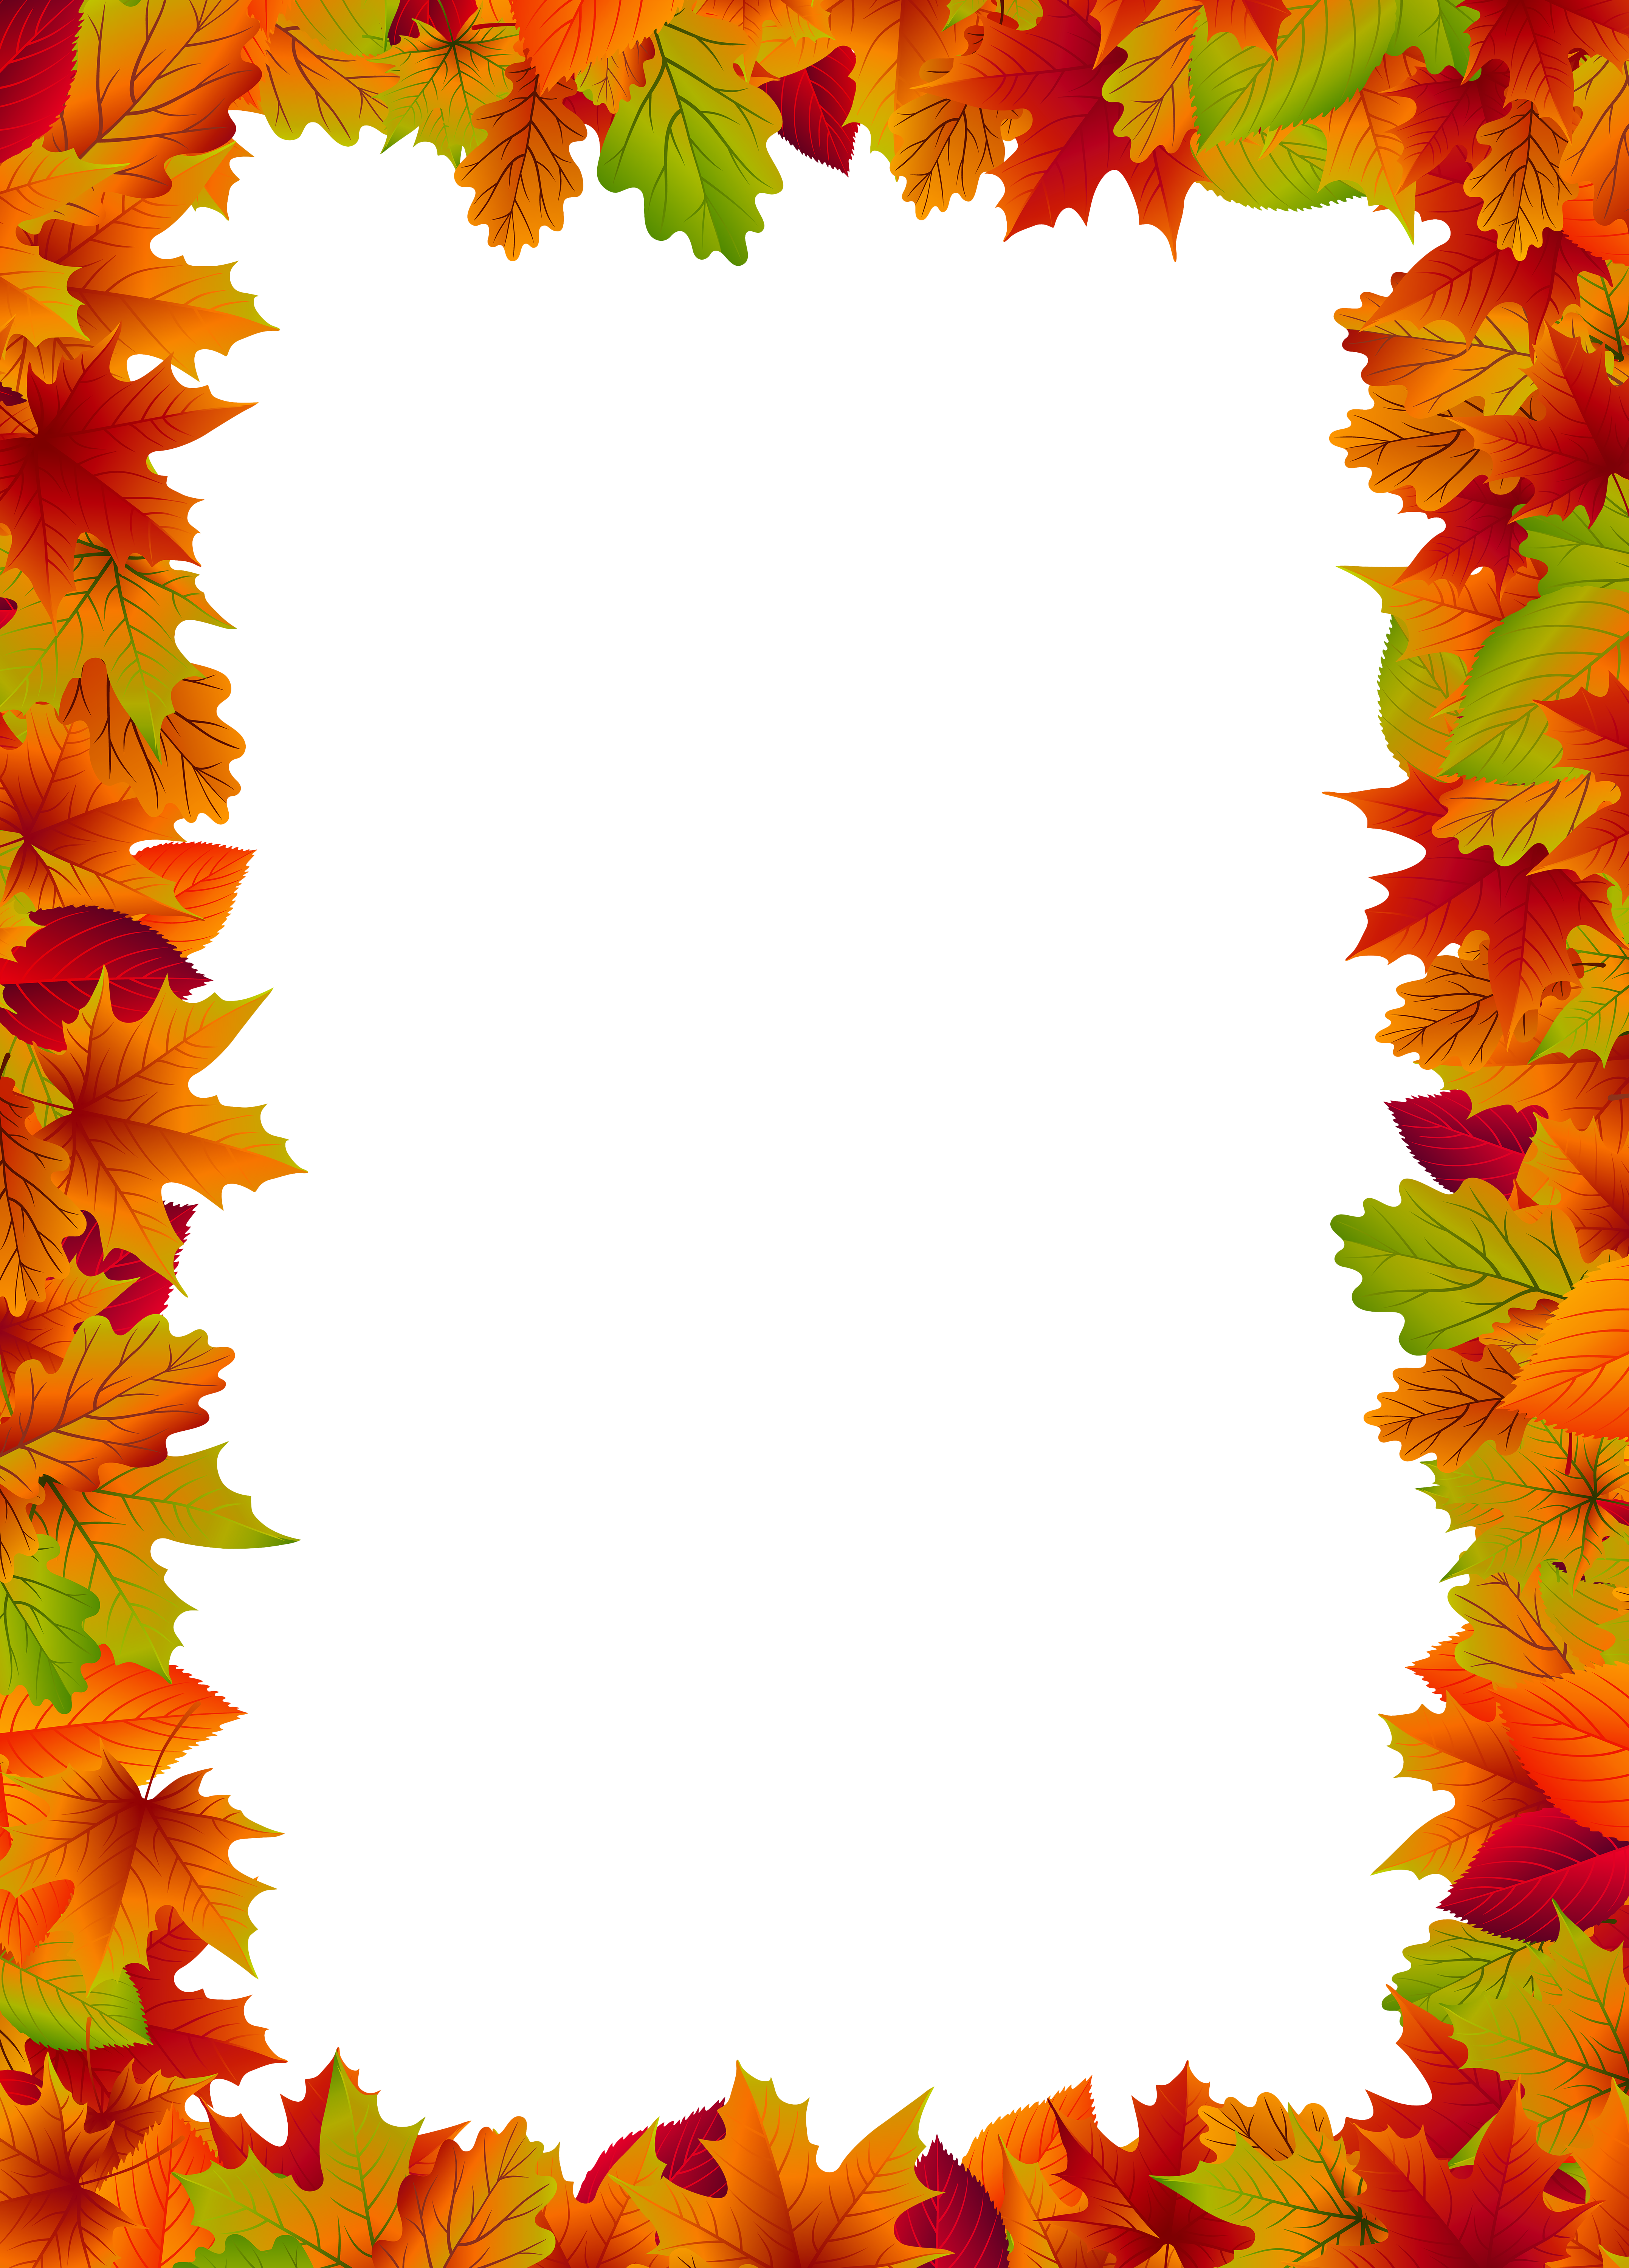 Fall Border Frame PNG Clip Art Image | Gallery Yopriceville - High